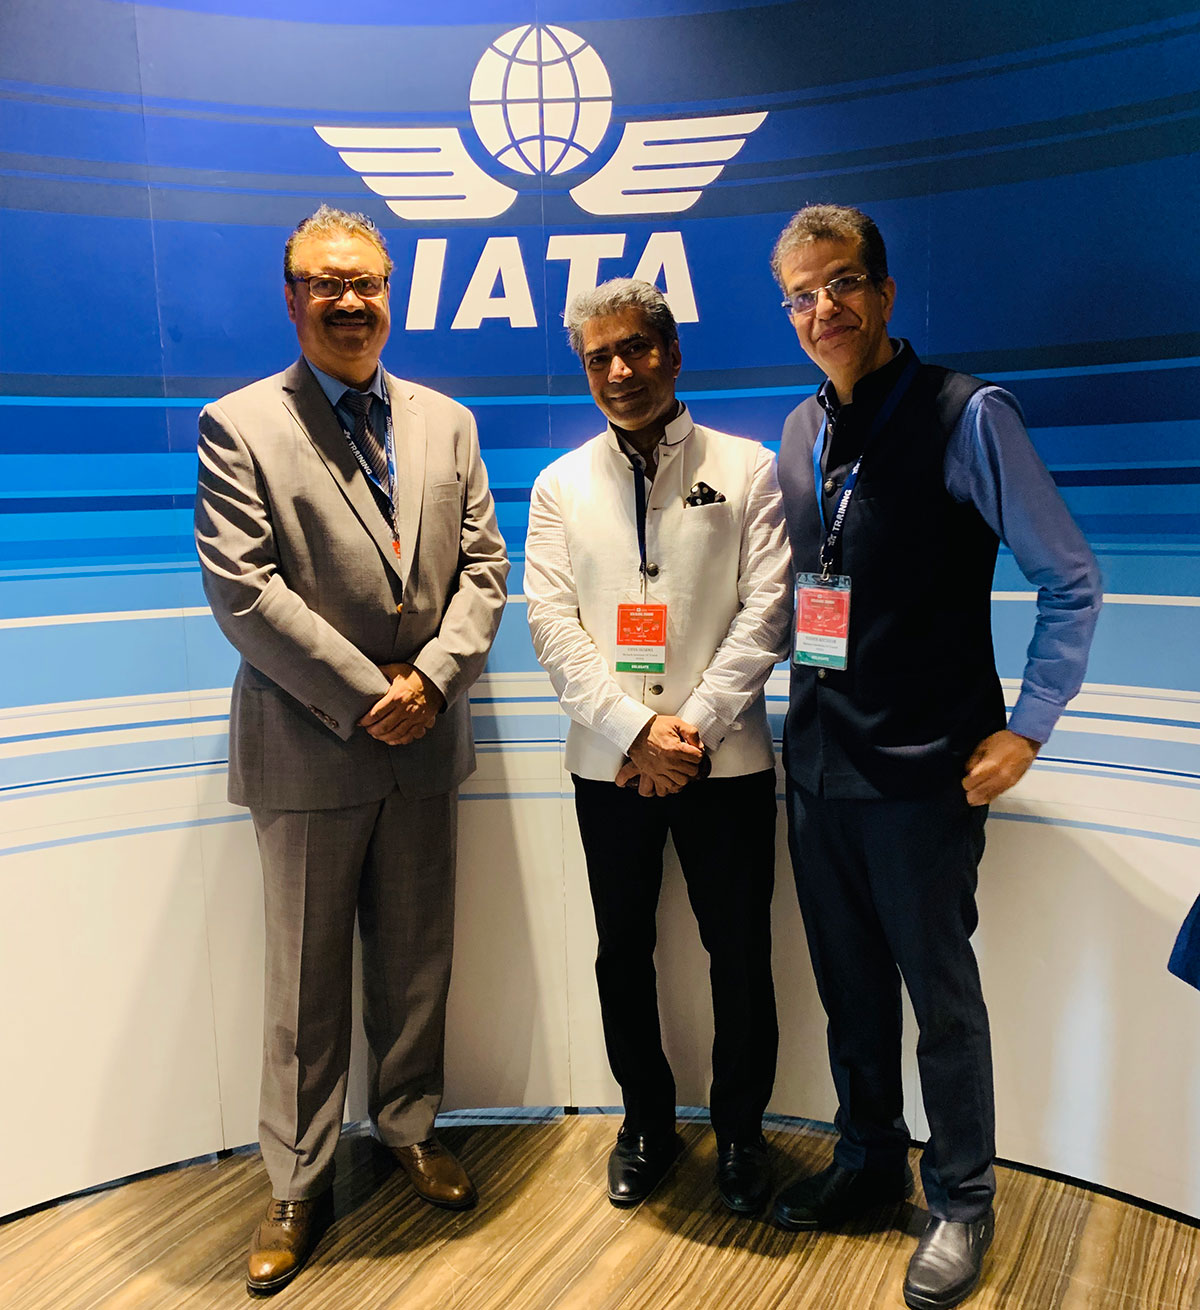 Our Directors Vipan Sharma & Sudhir Kochhar with Gurjit Gill, Manager, Training Partner & Business Development at IATA Training at IATA Global Training Partner Conference held in New Delhi